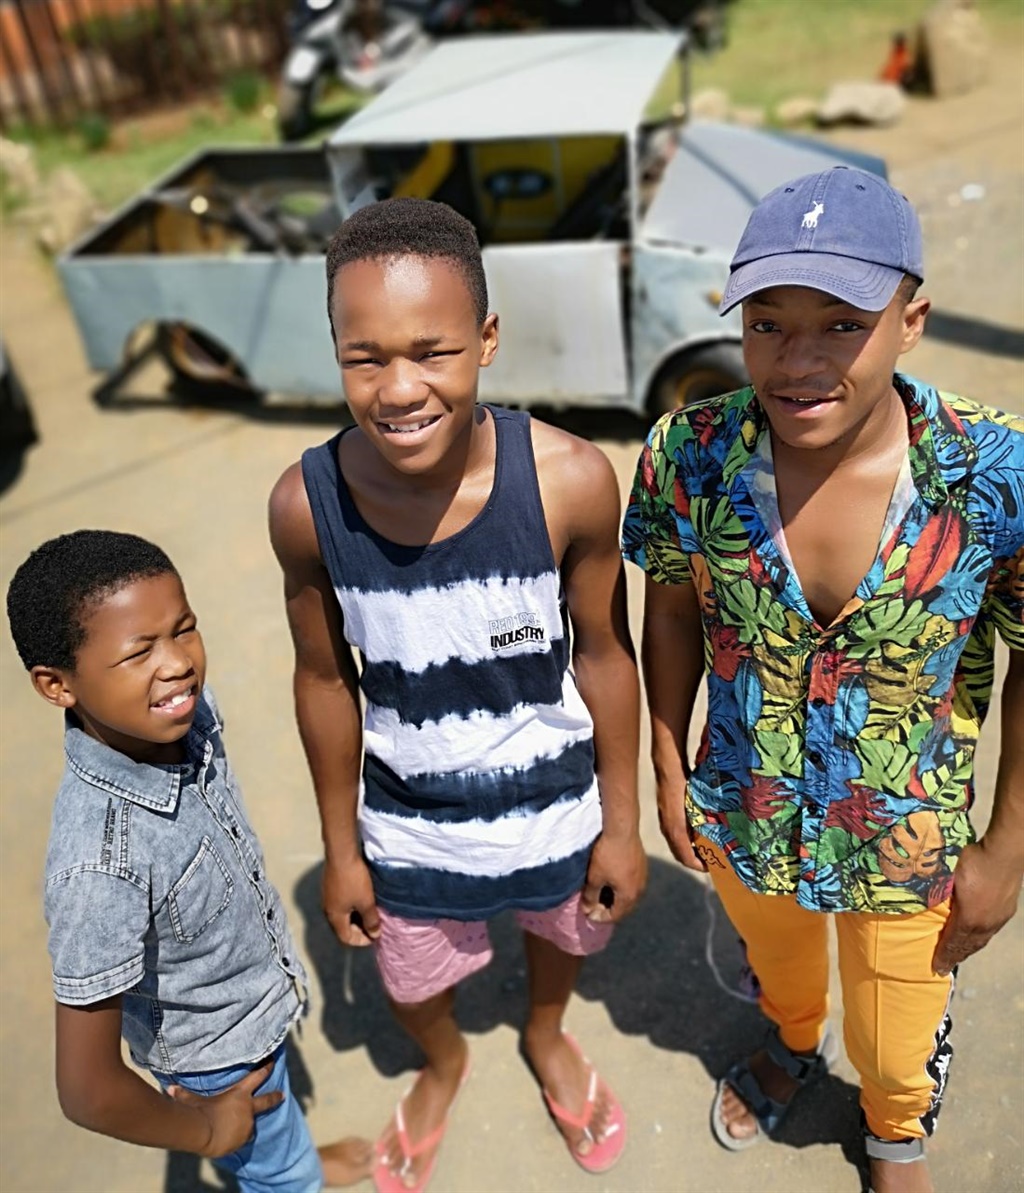 Obakeng's brothers, Ofentse (11) and Olebogeng (22) flank him in front of his new bakkie. Photo: Kabelo Tlhabanelo.